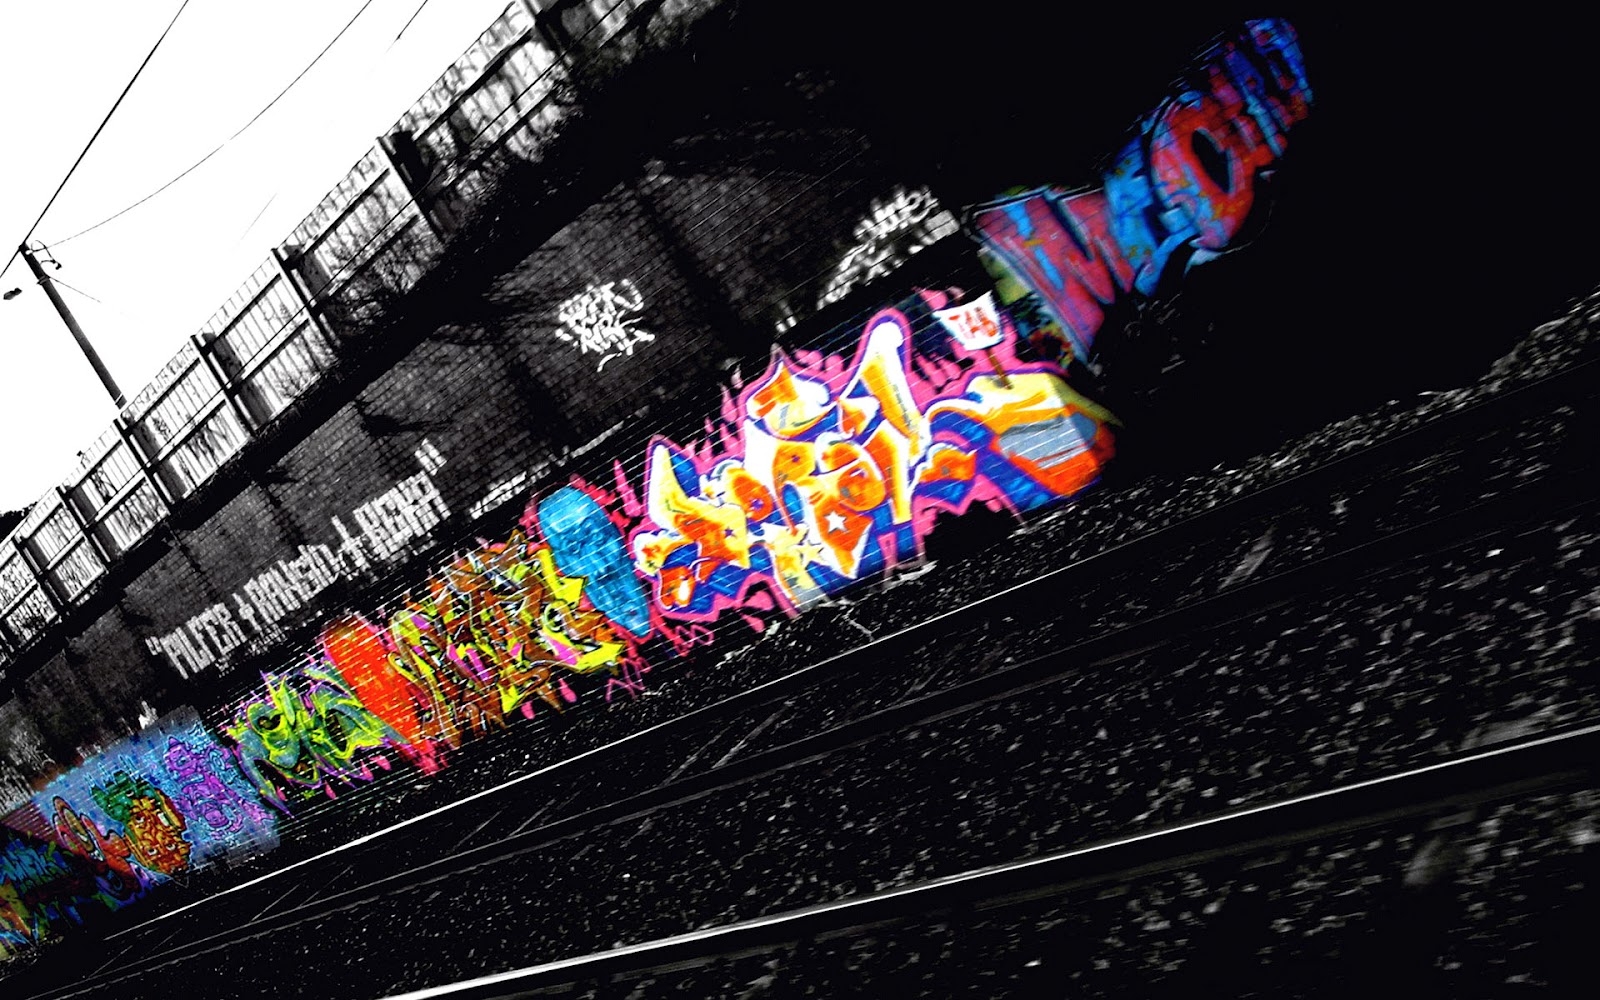  Graffiti  HD  Collection My Pictures World